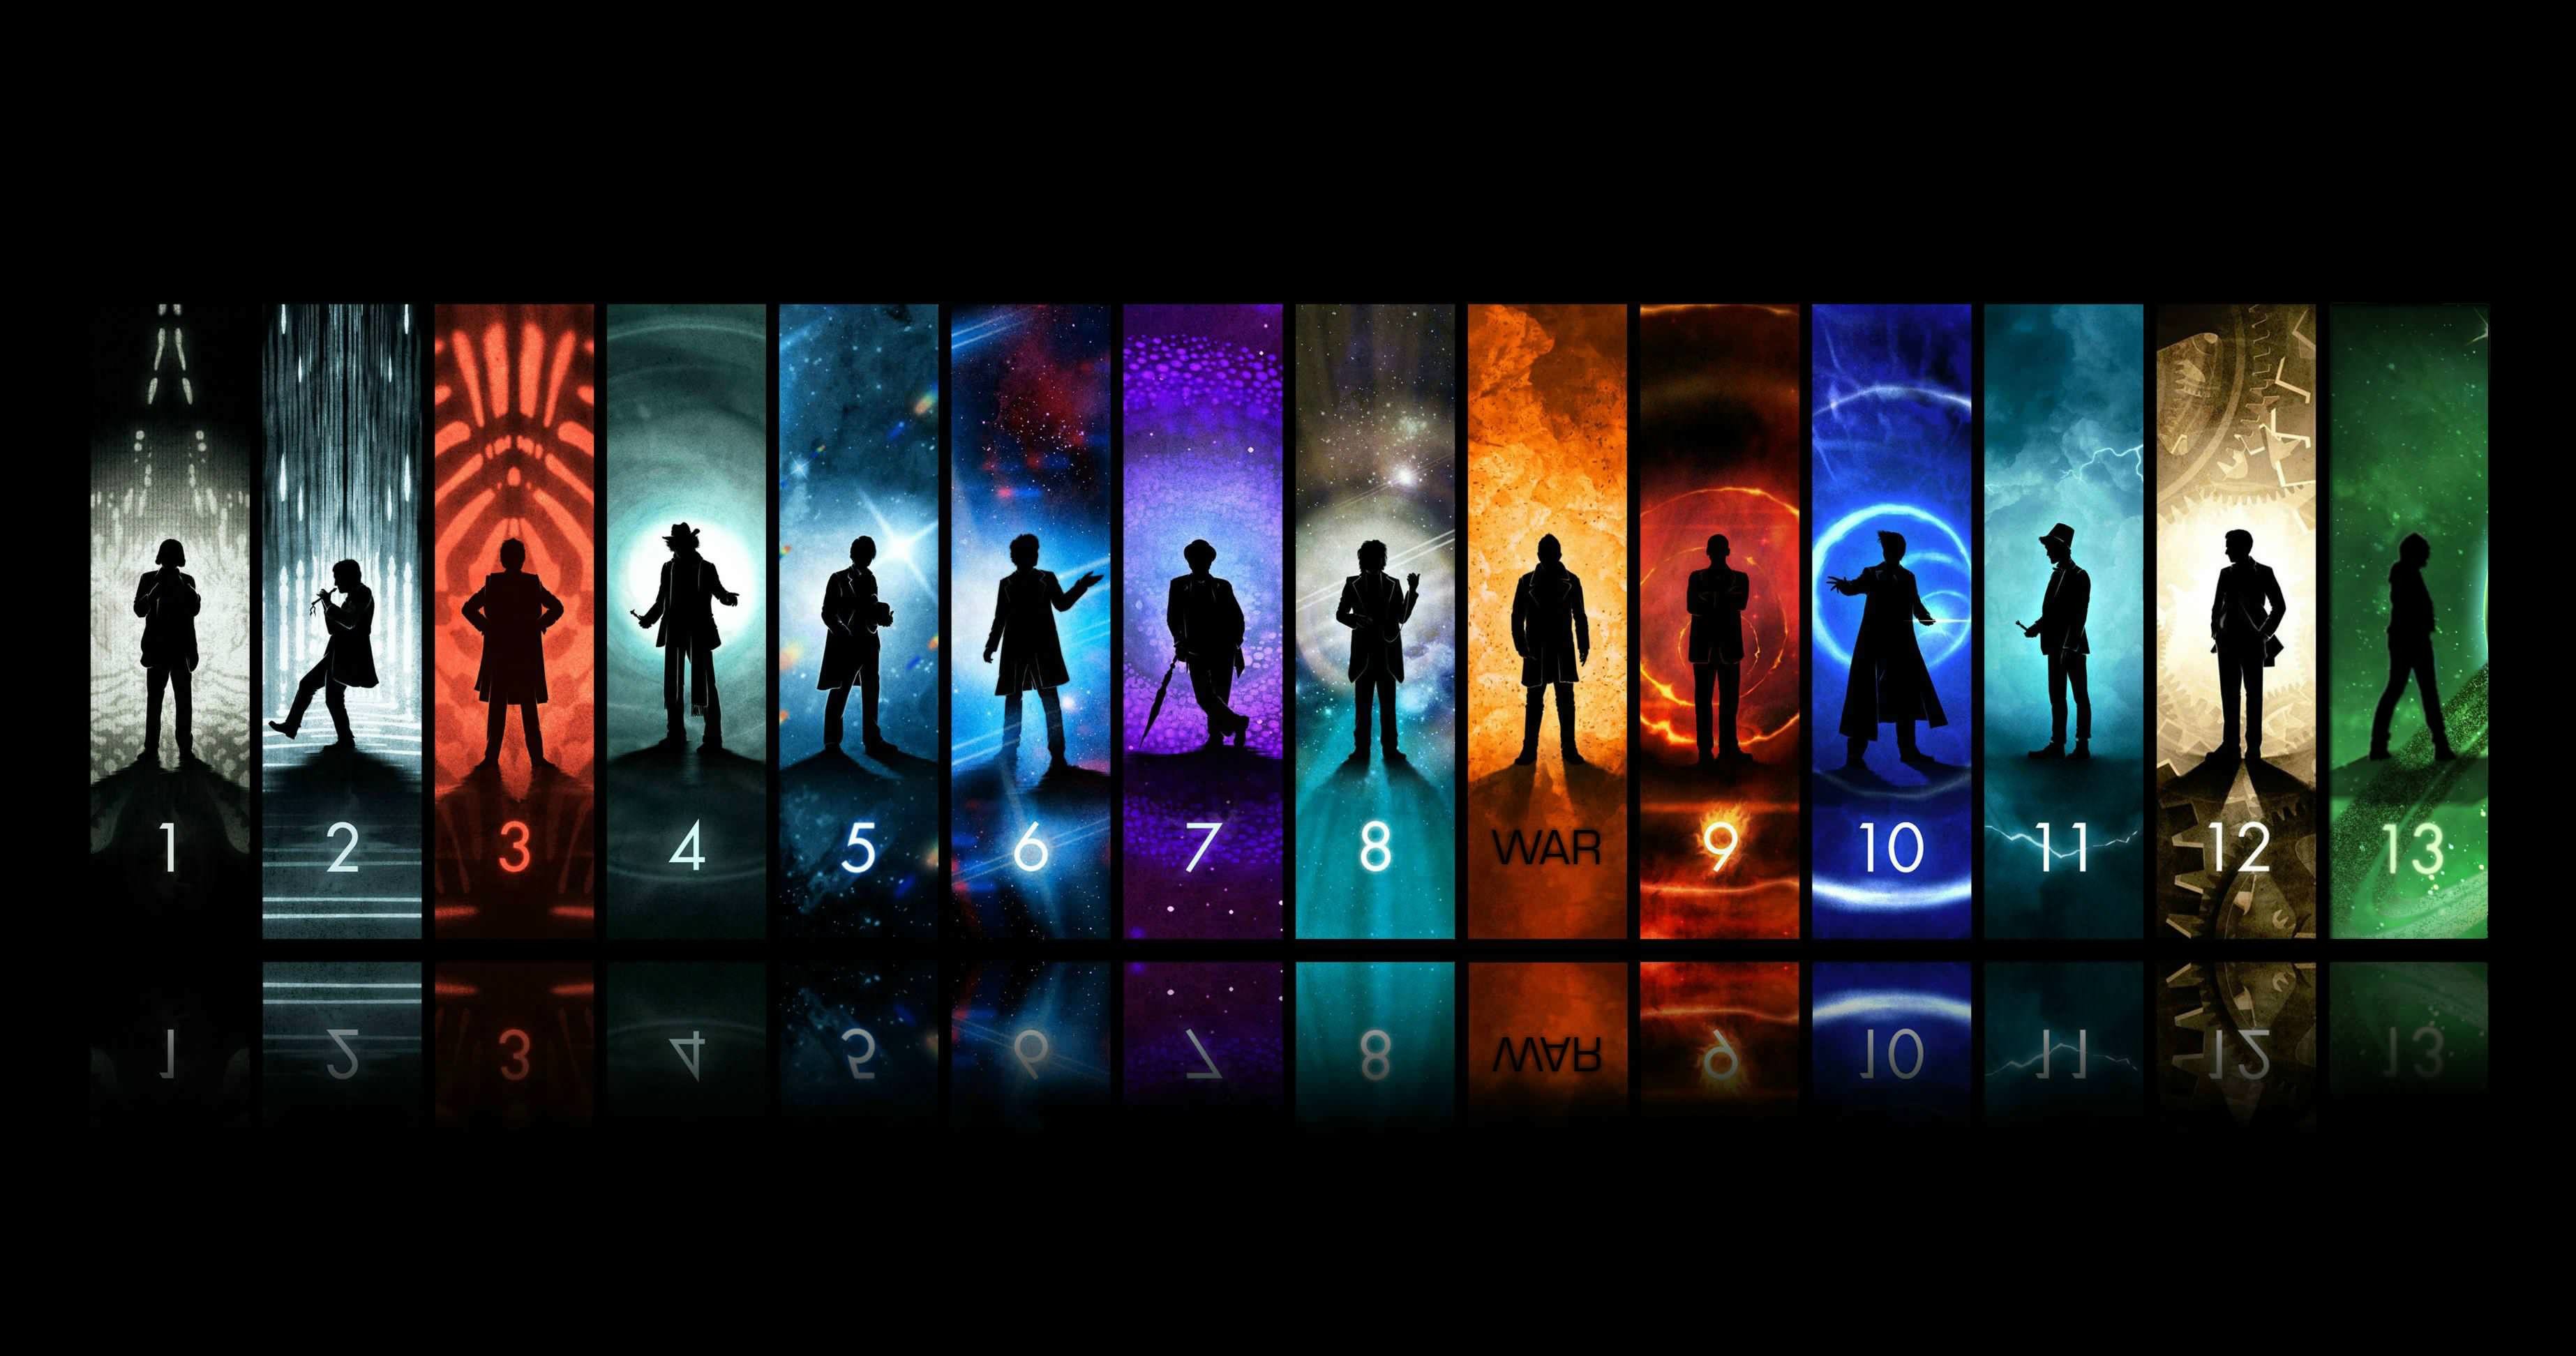 3692x1944 ... I updated popular Whovian wallpaper by adding 13th doctor